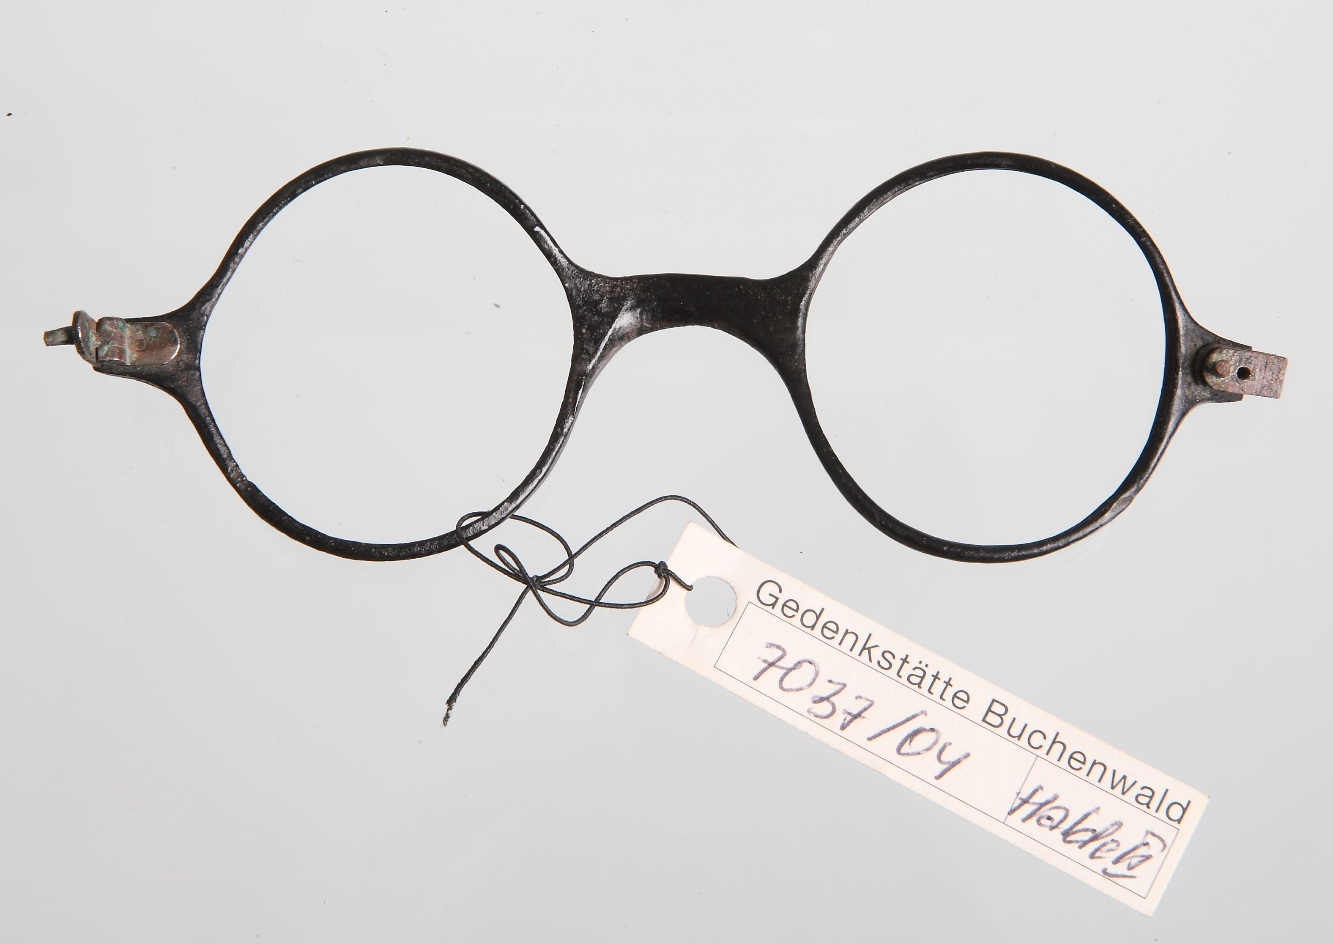 You can see a frame of glasses with round frames. It is a found object from the educational material found object case.